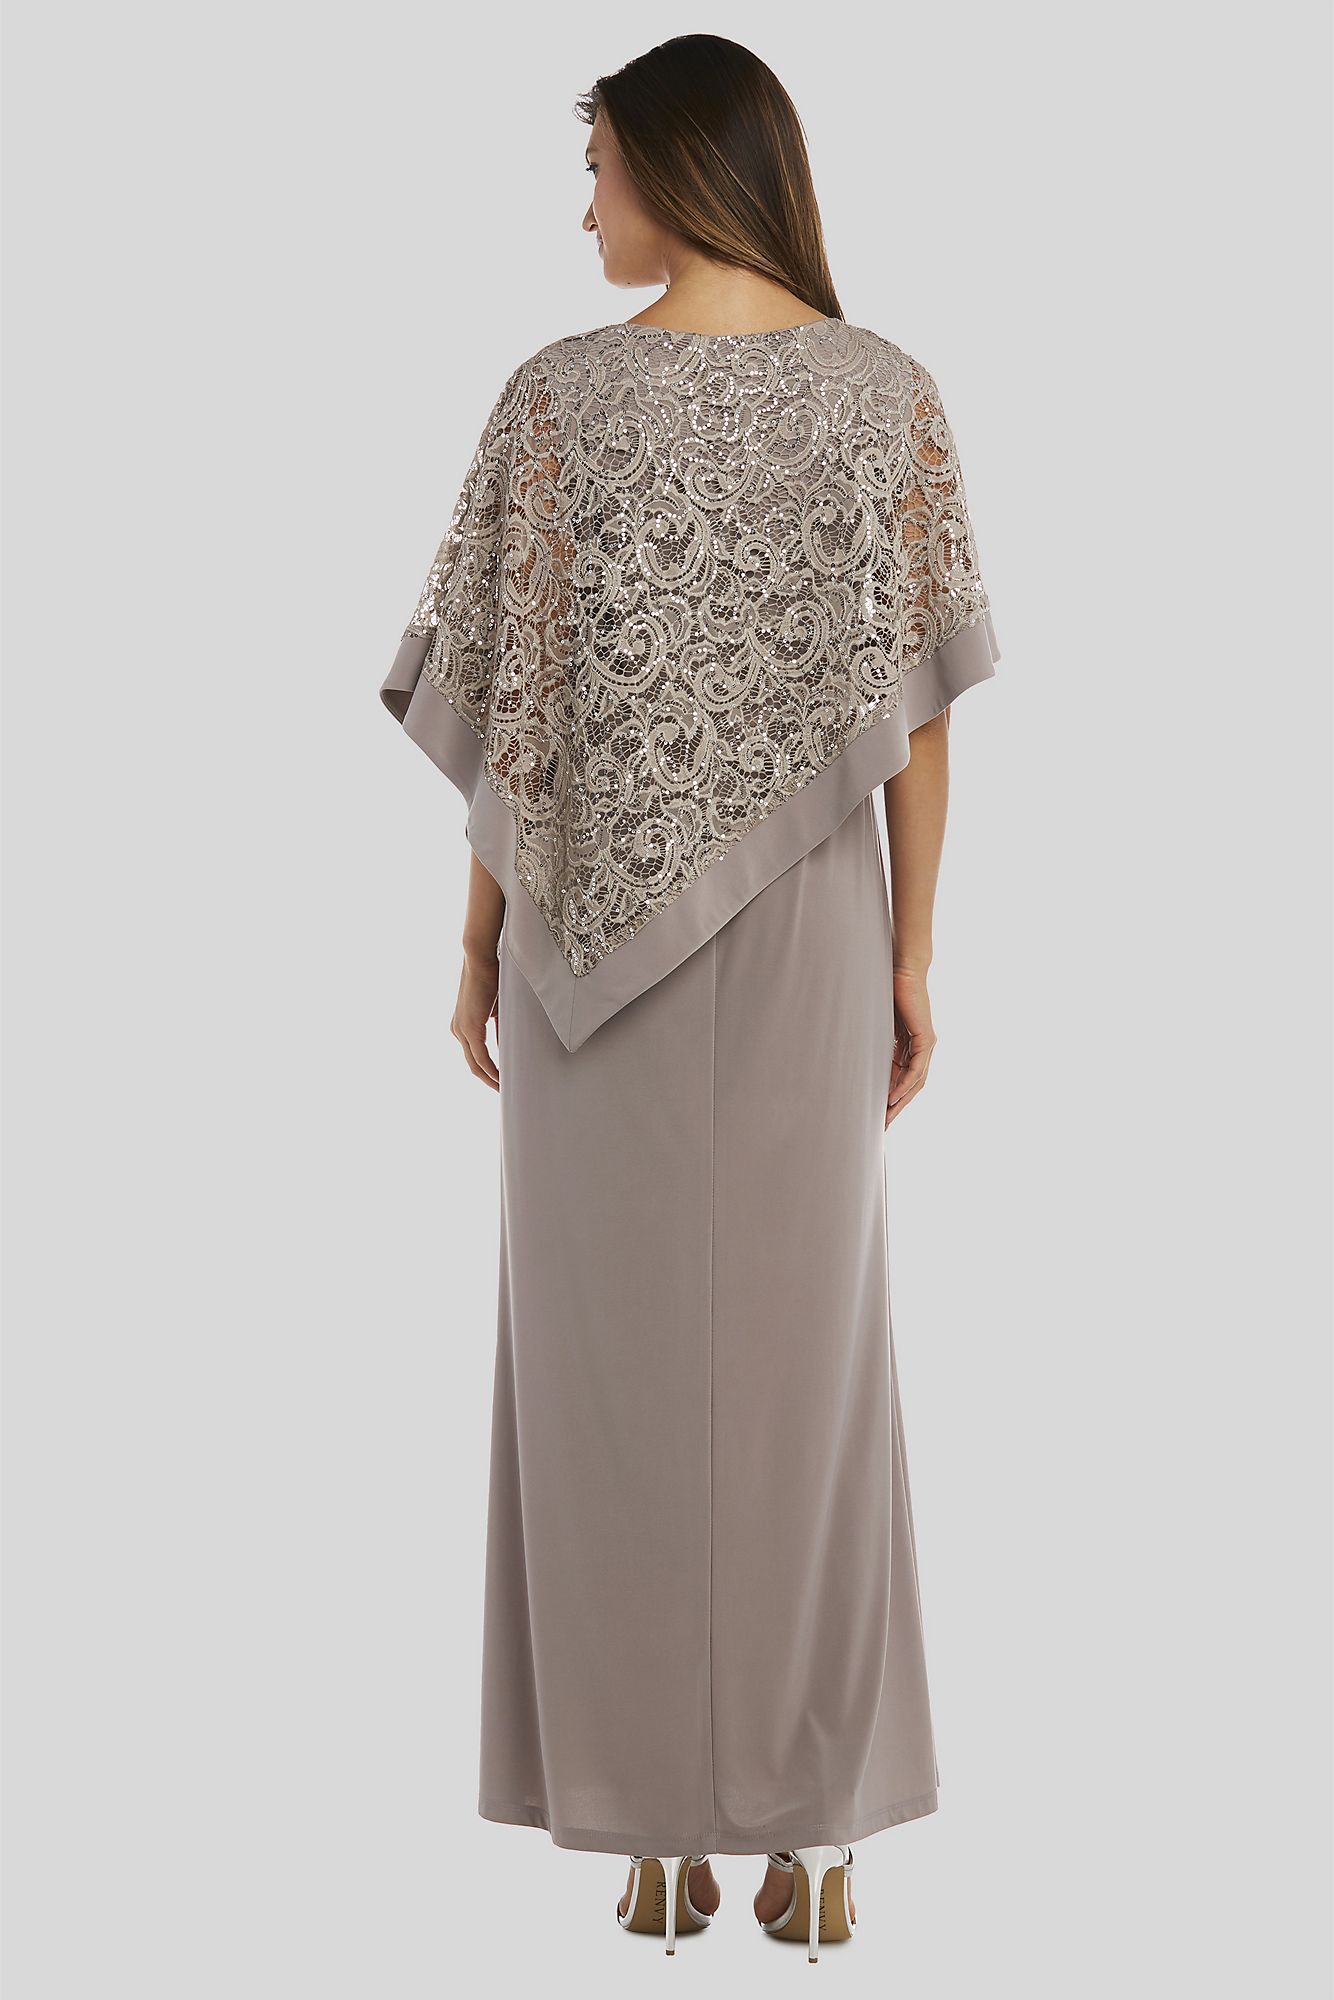 Jersey Sheath Gown with Sequin Lace Capelet 5239 RM Richards